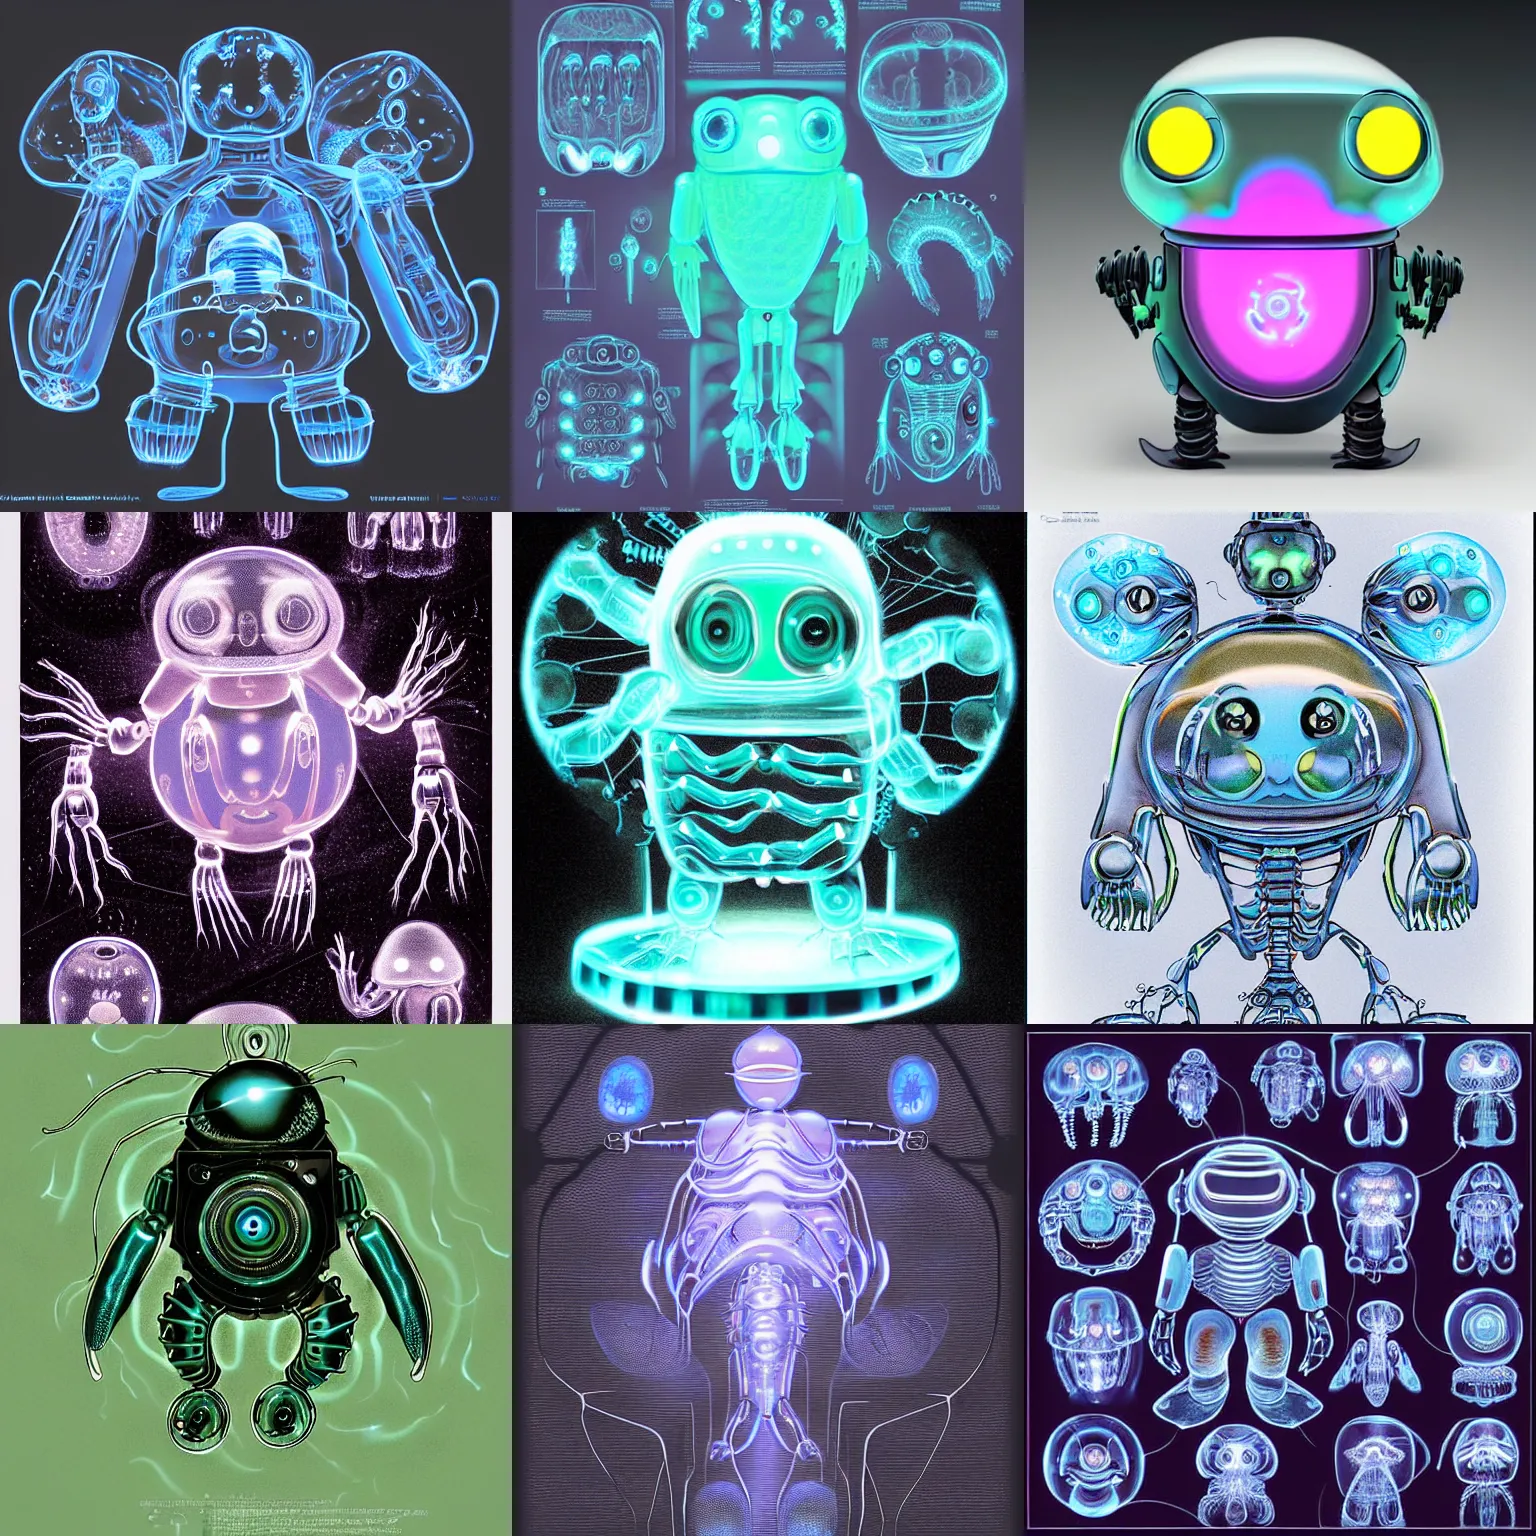 Prompt: cute! tron, cute baby robot jelly fish, ghost shrimp robot, biomechanical xray, deepsea, irobot, glowing from inside, gears, transistors, wrinkled, by Wayne Barlowe, Barreleye fish, translucent SSS, rimlight, dancing, fighting, bioluminescent screaming pictoplasma characterdesign toydesign toy monster creature, zbrush, octane, hardsurface modelling, artstation, cg society, by greg rutkowksi, by Eddie Mendoza, by Peter mohrbacher, by tooth wu, cyberpunk